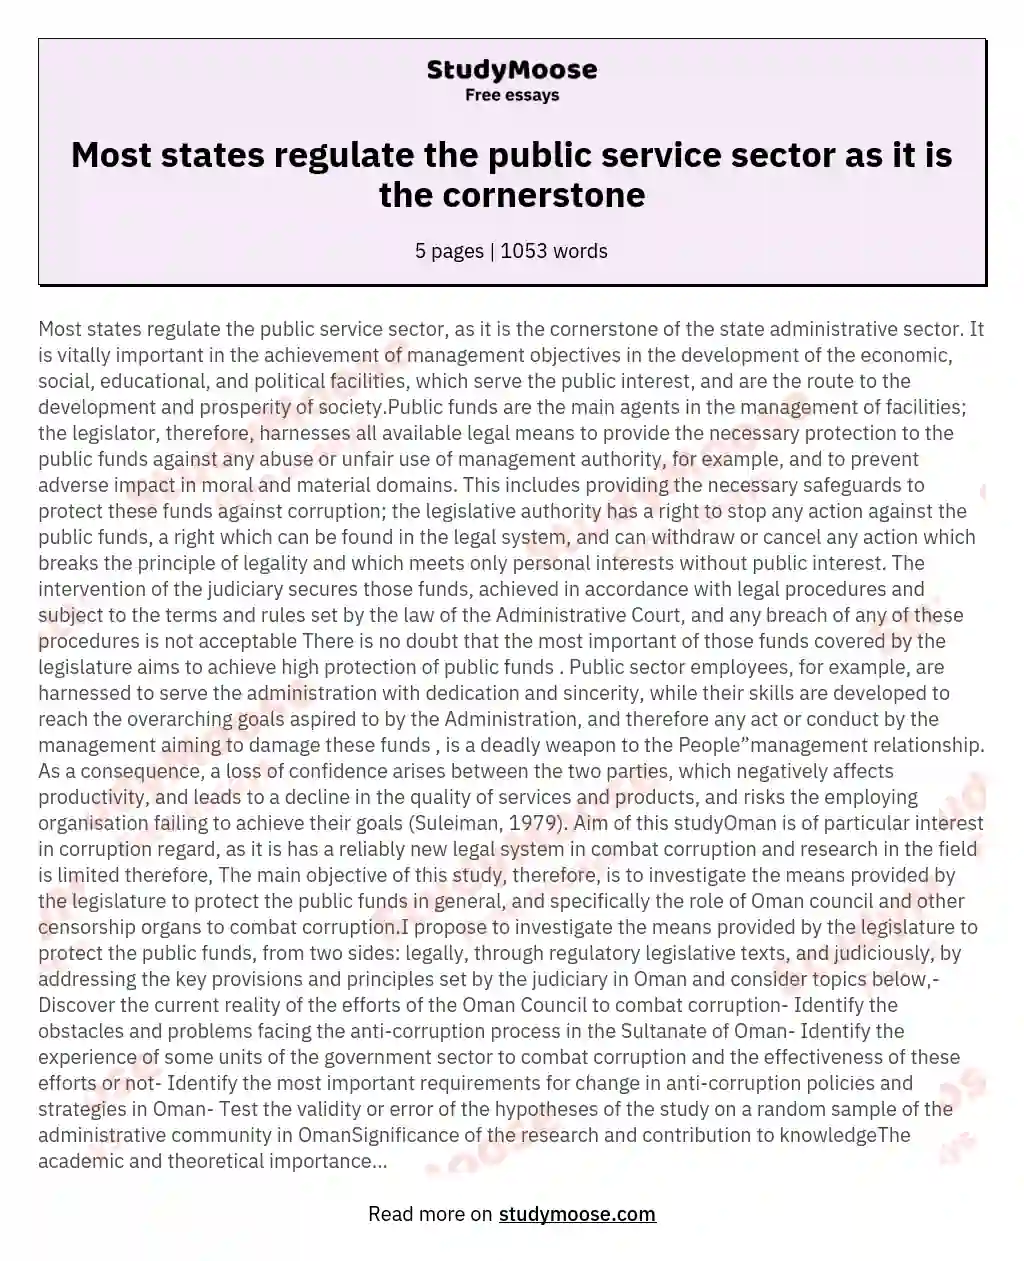 Most states regulate the public service sector as it is the cornerstone essay